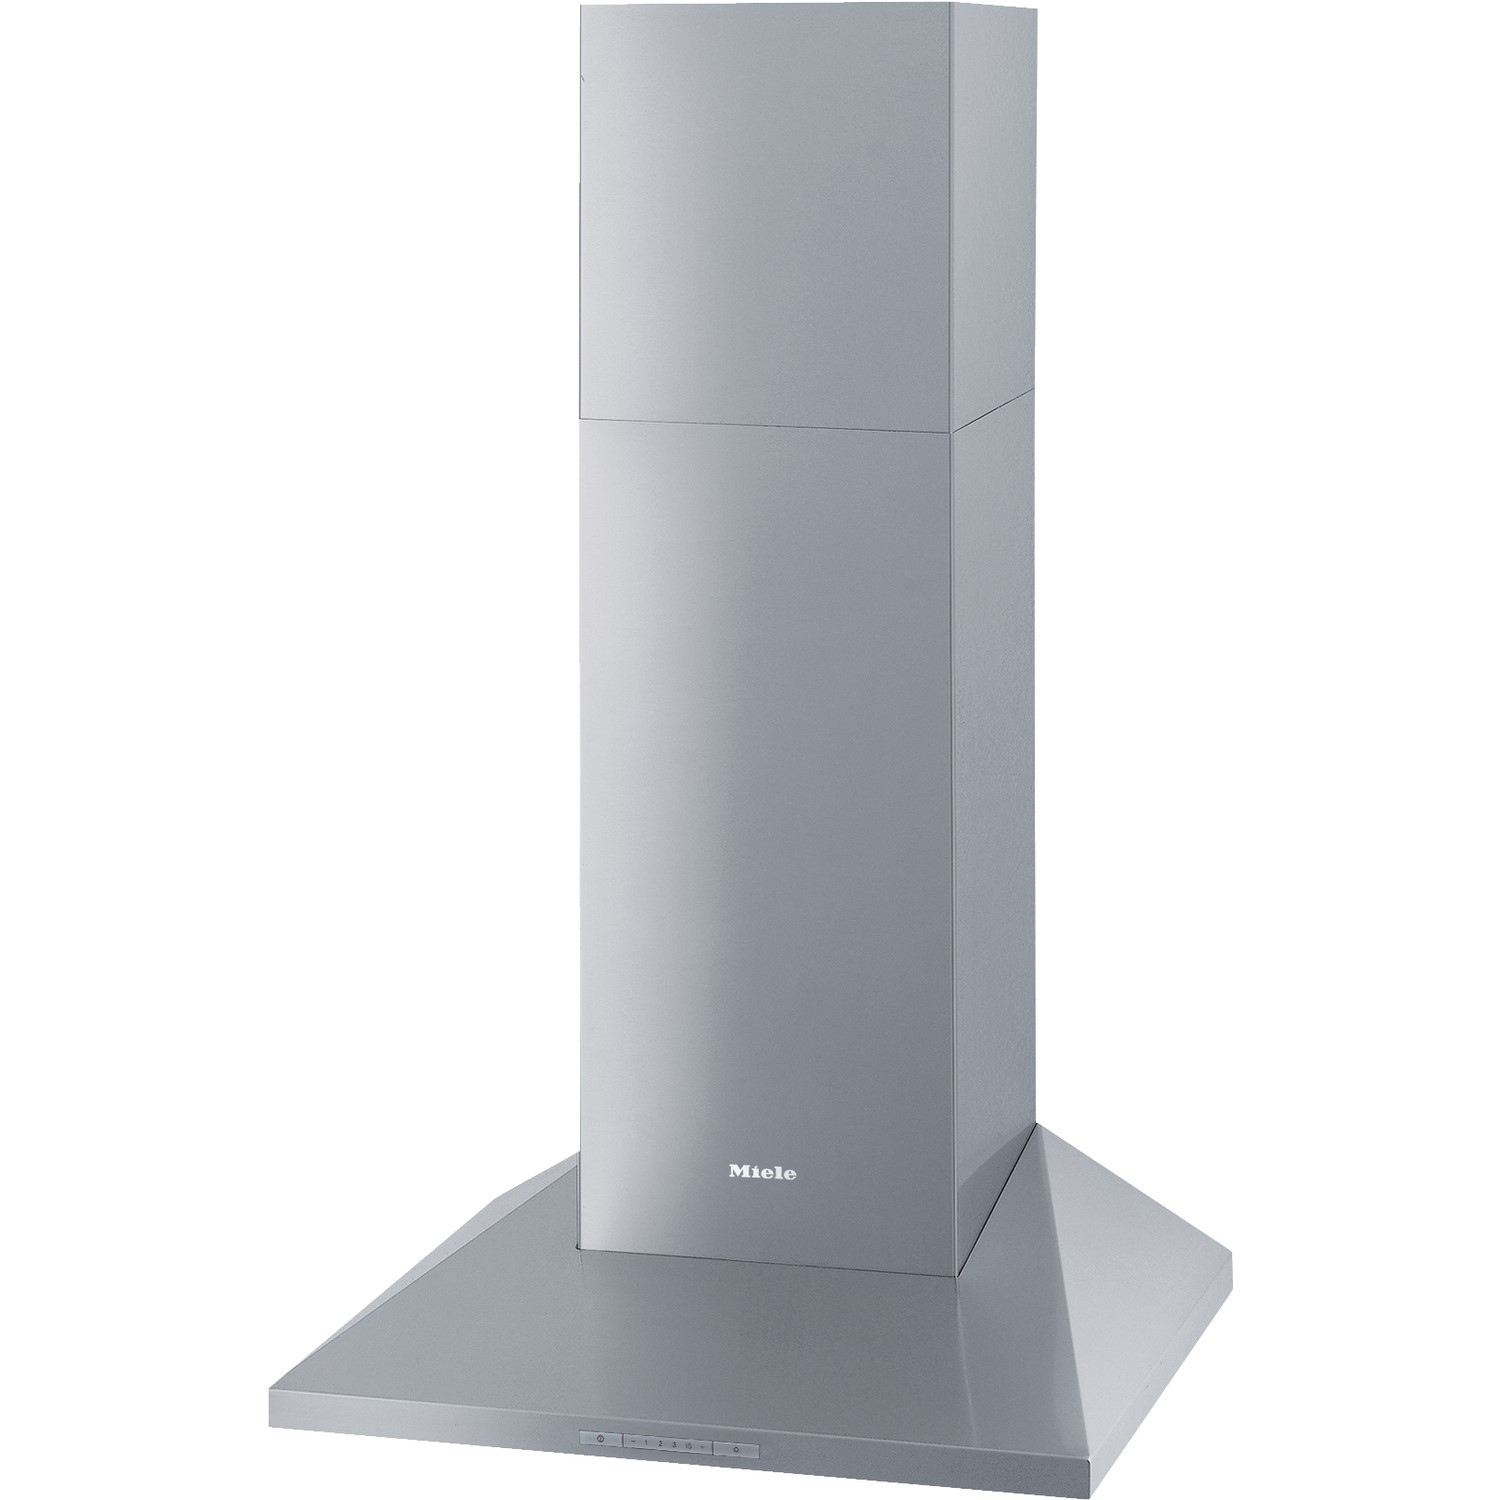 Miele Classic 60cm Chimney Cooker Hood - Stainless Steel